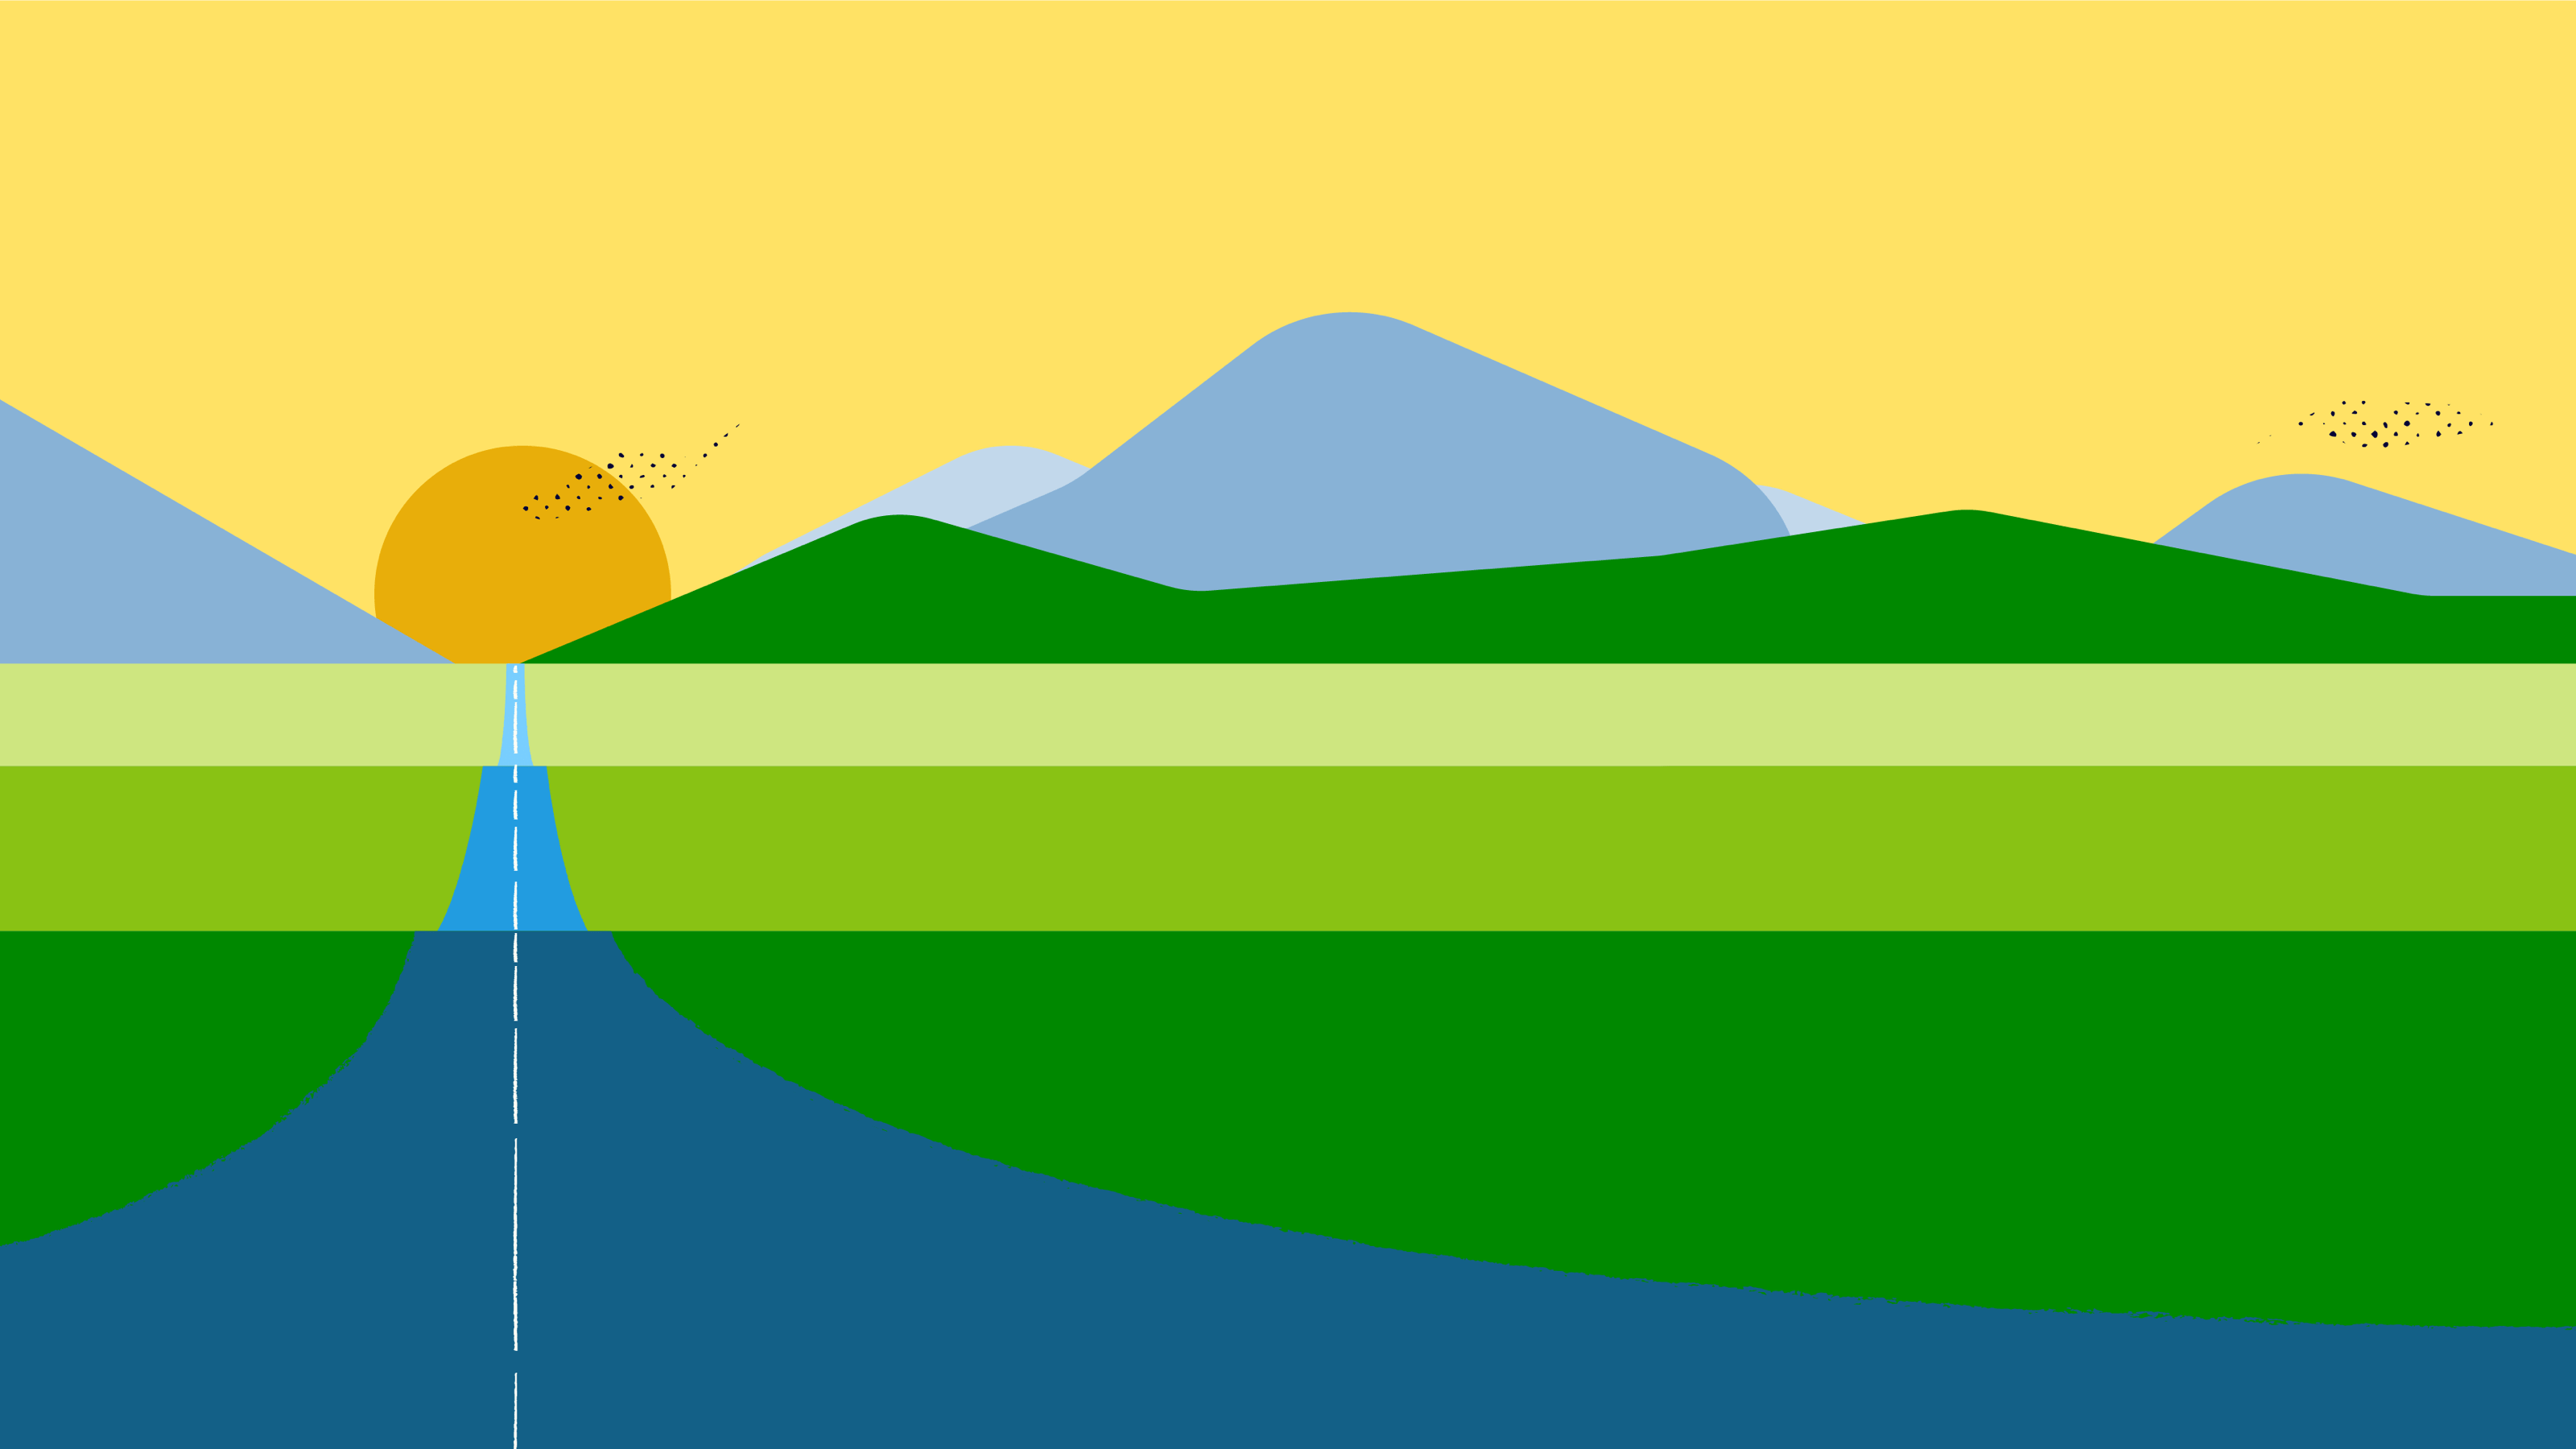 Illustration of a long road heading towards a sun setting next to green fields.